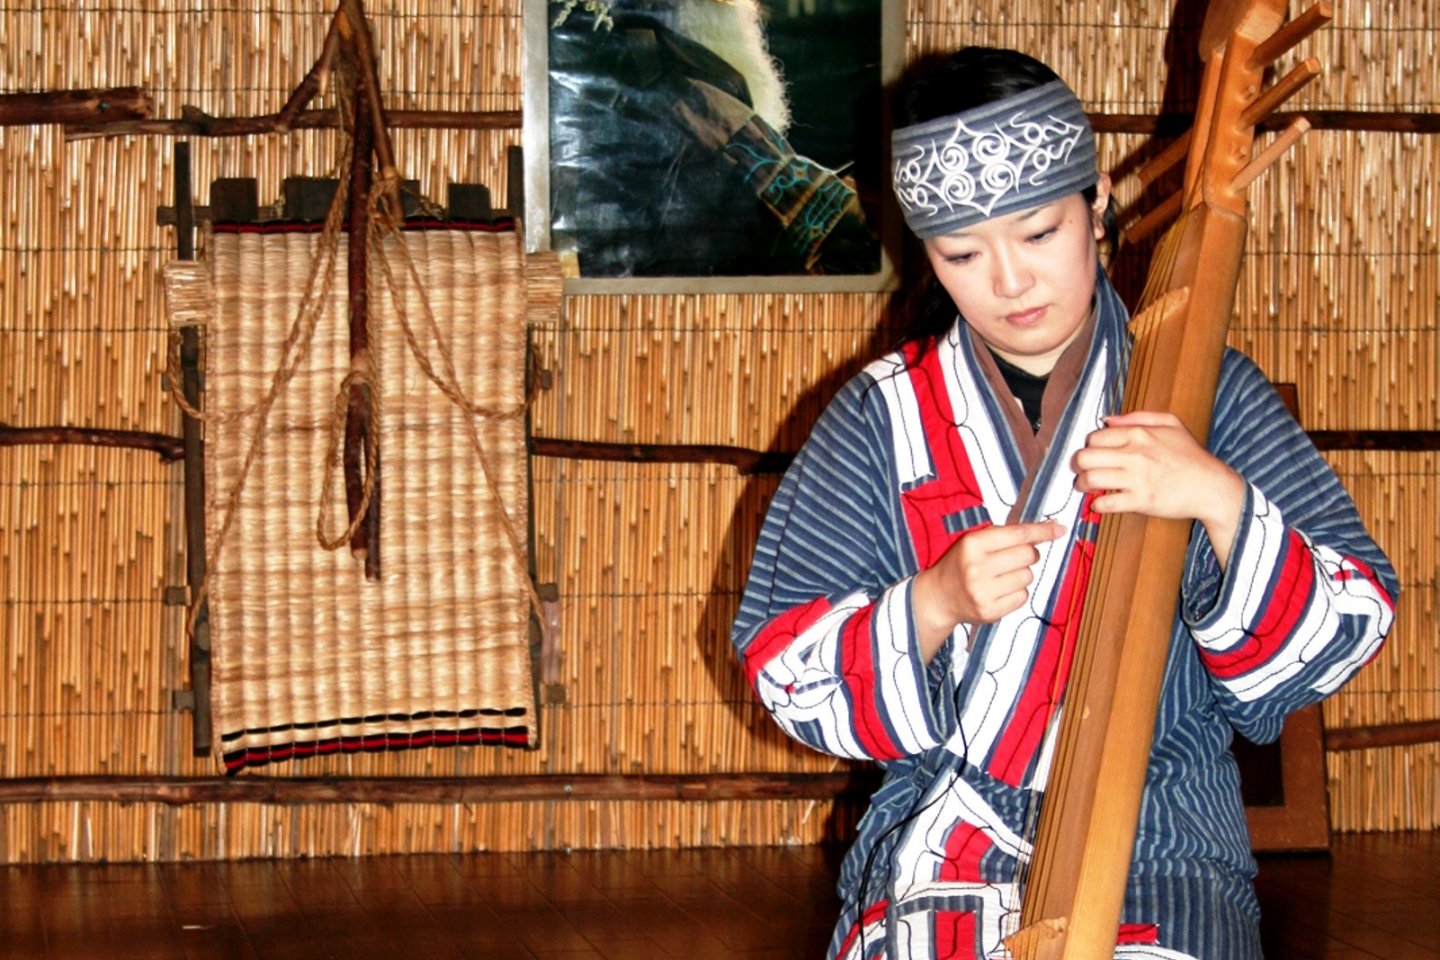 The Ainu have a wonderful connection with nature through their folk art and music